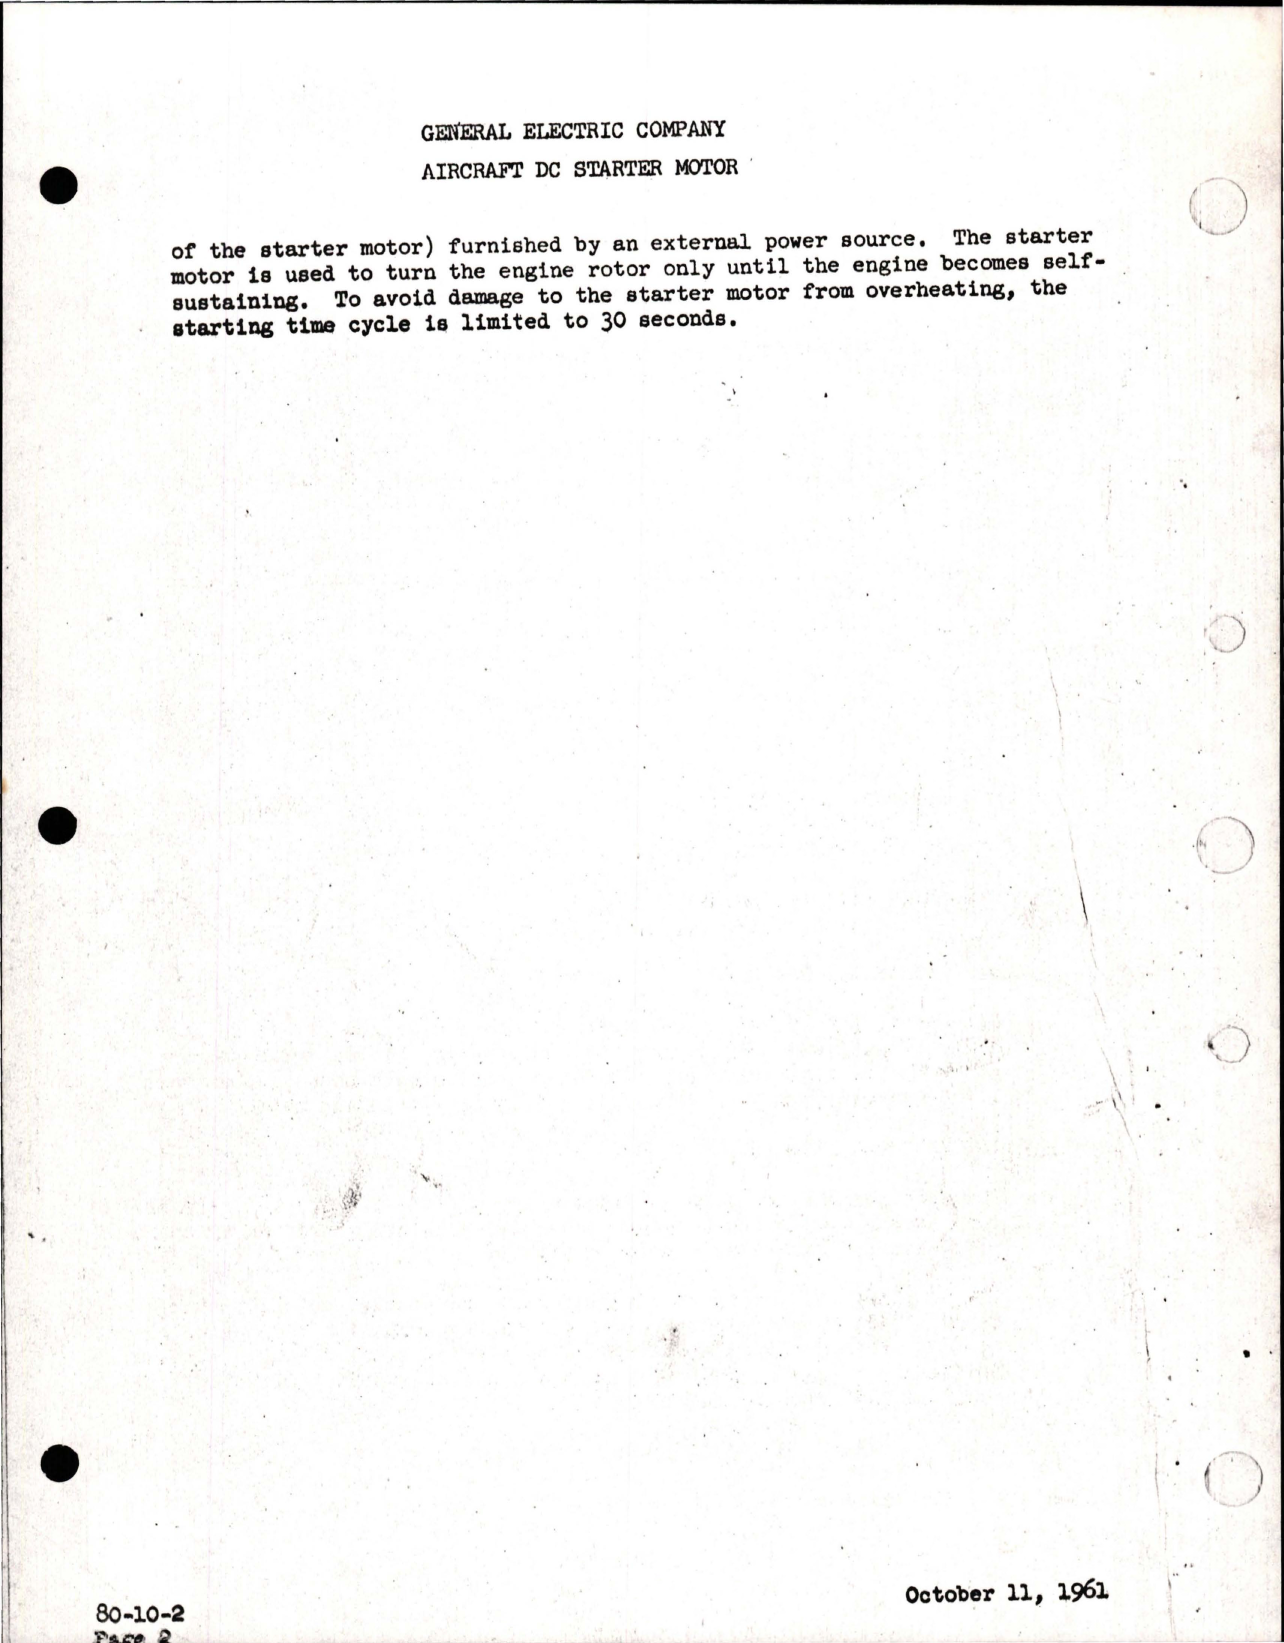 Sample page 5 from AirCorps Library document: Instructions for Aircraft DC Starter Motor - Model 2CM270D5 